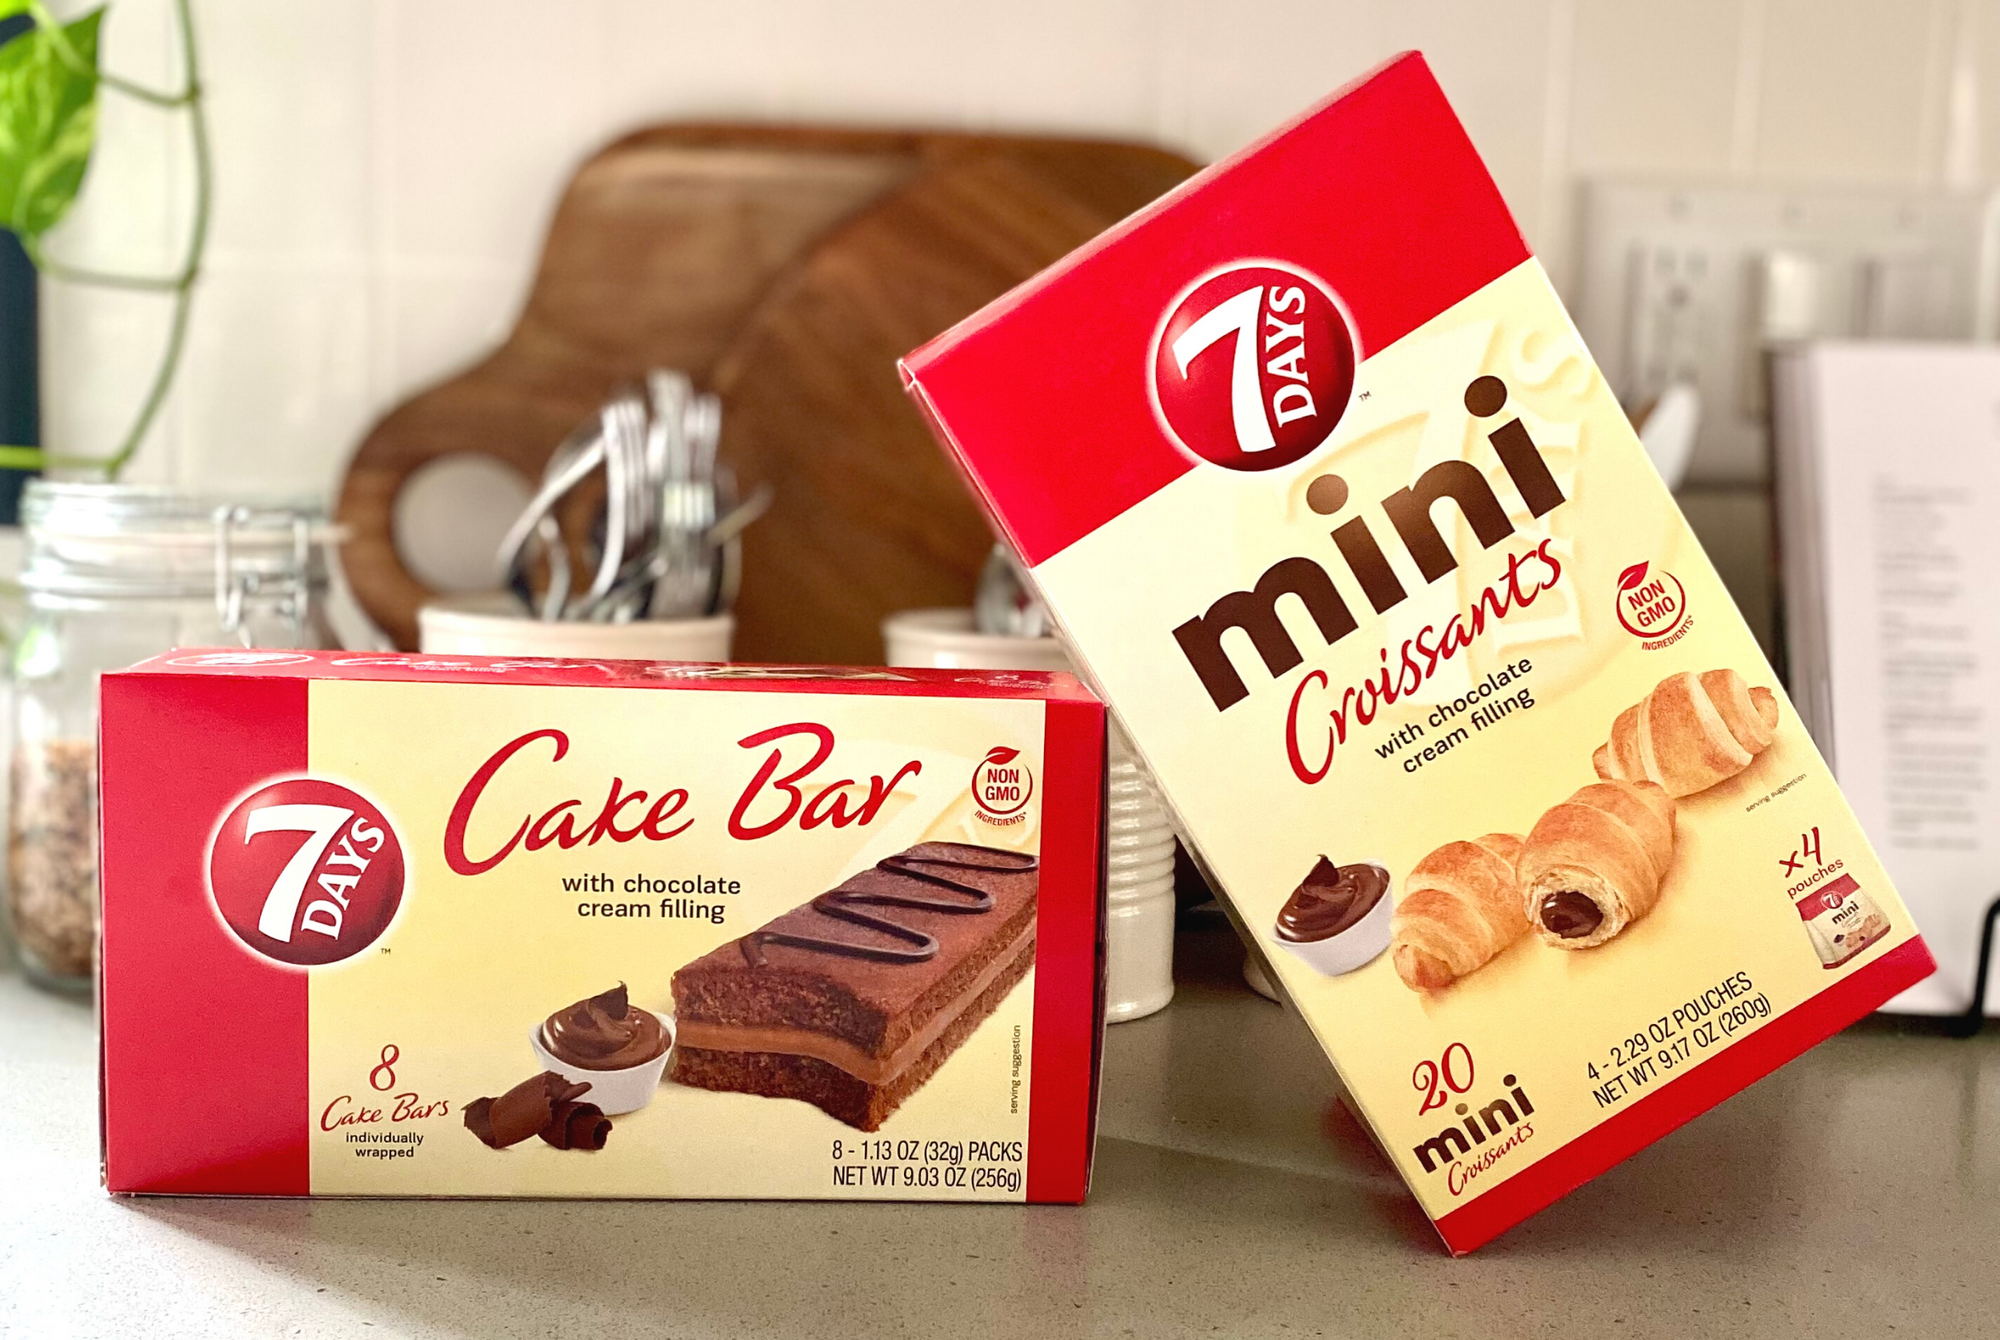 cake bar with chocolate cream filling and mini croissants in box packaging